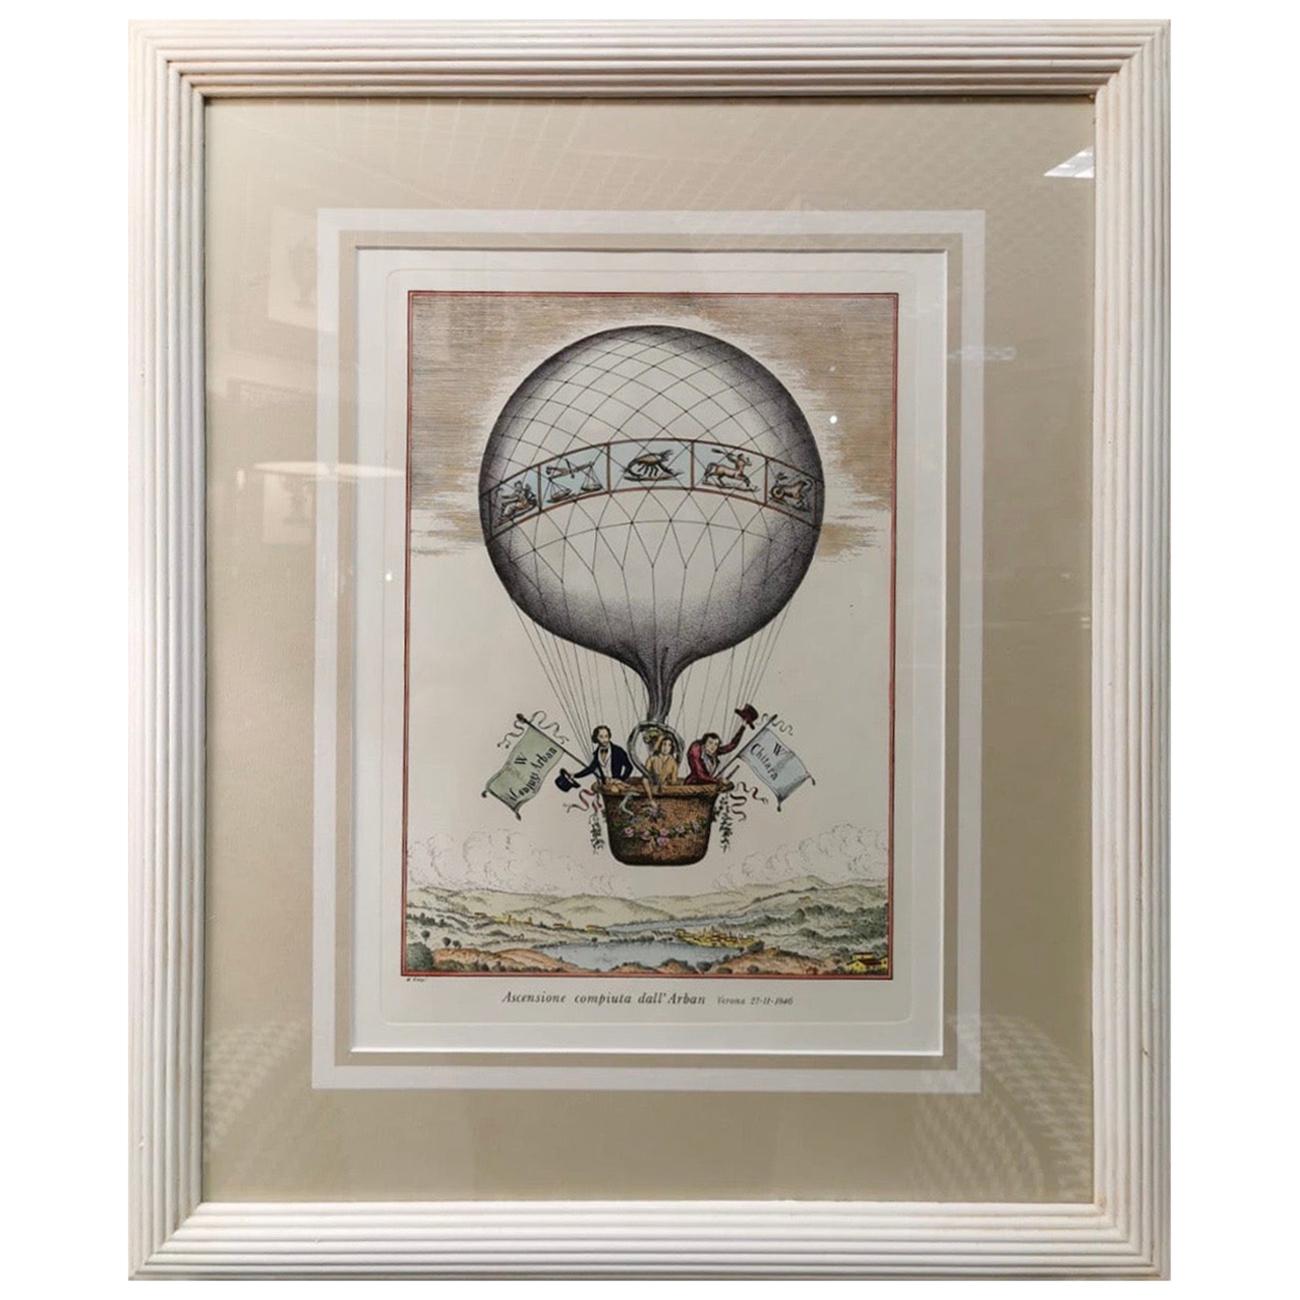 Italian Contemporary Handmade Hot-Air Balloon Colored Print with Frame 3 of 3 For Sale